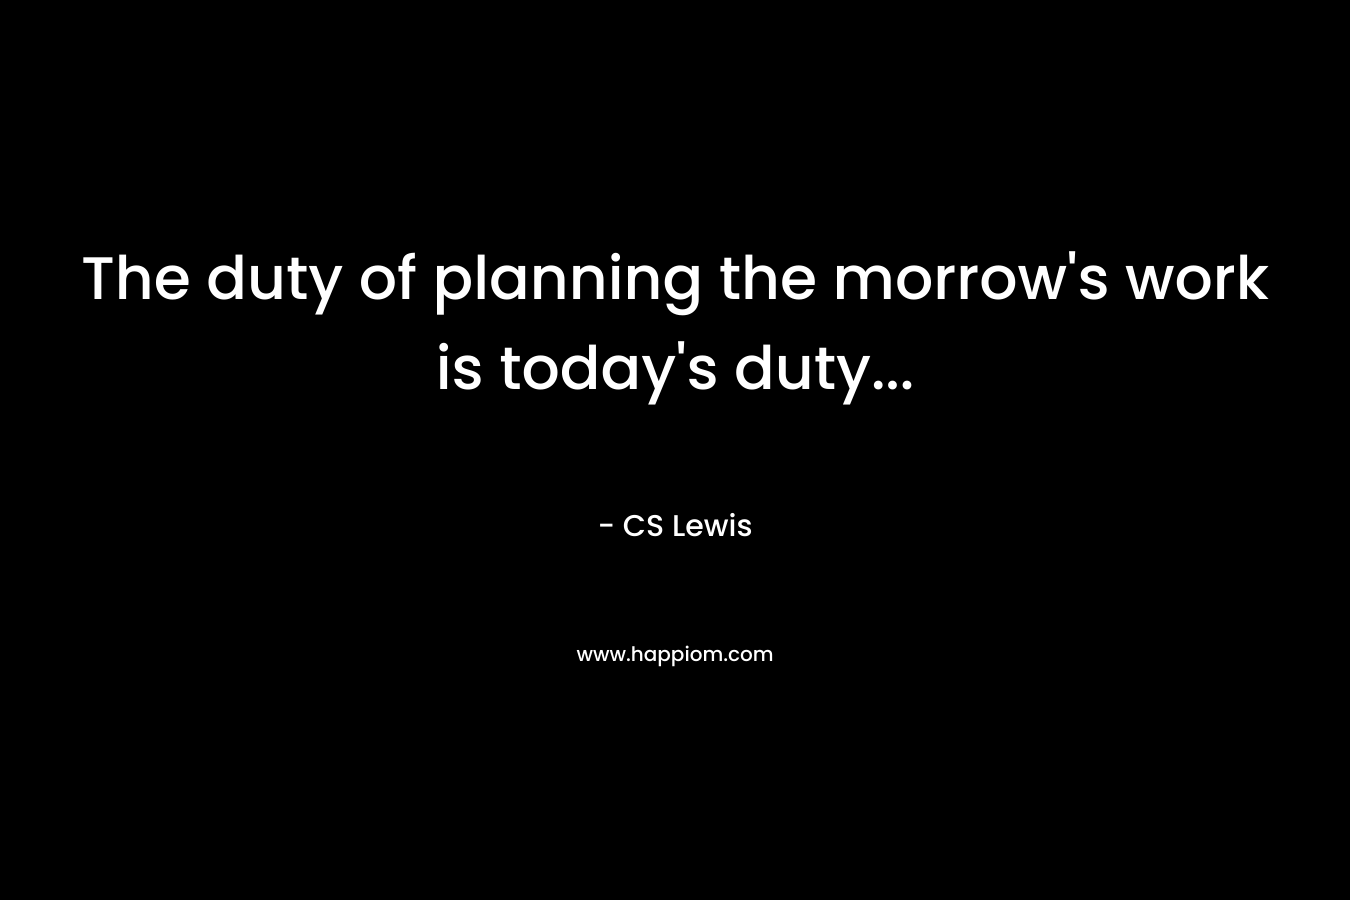 The duty of planning the morrow's work is today's duty...